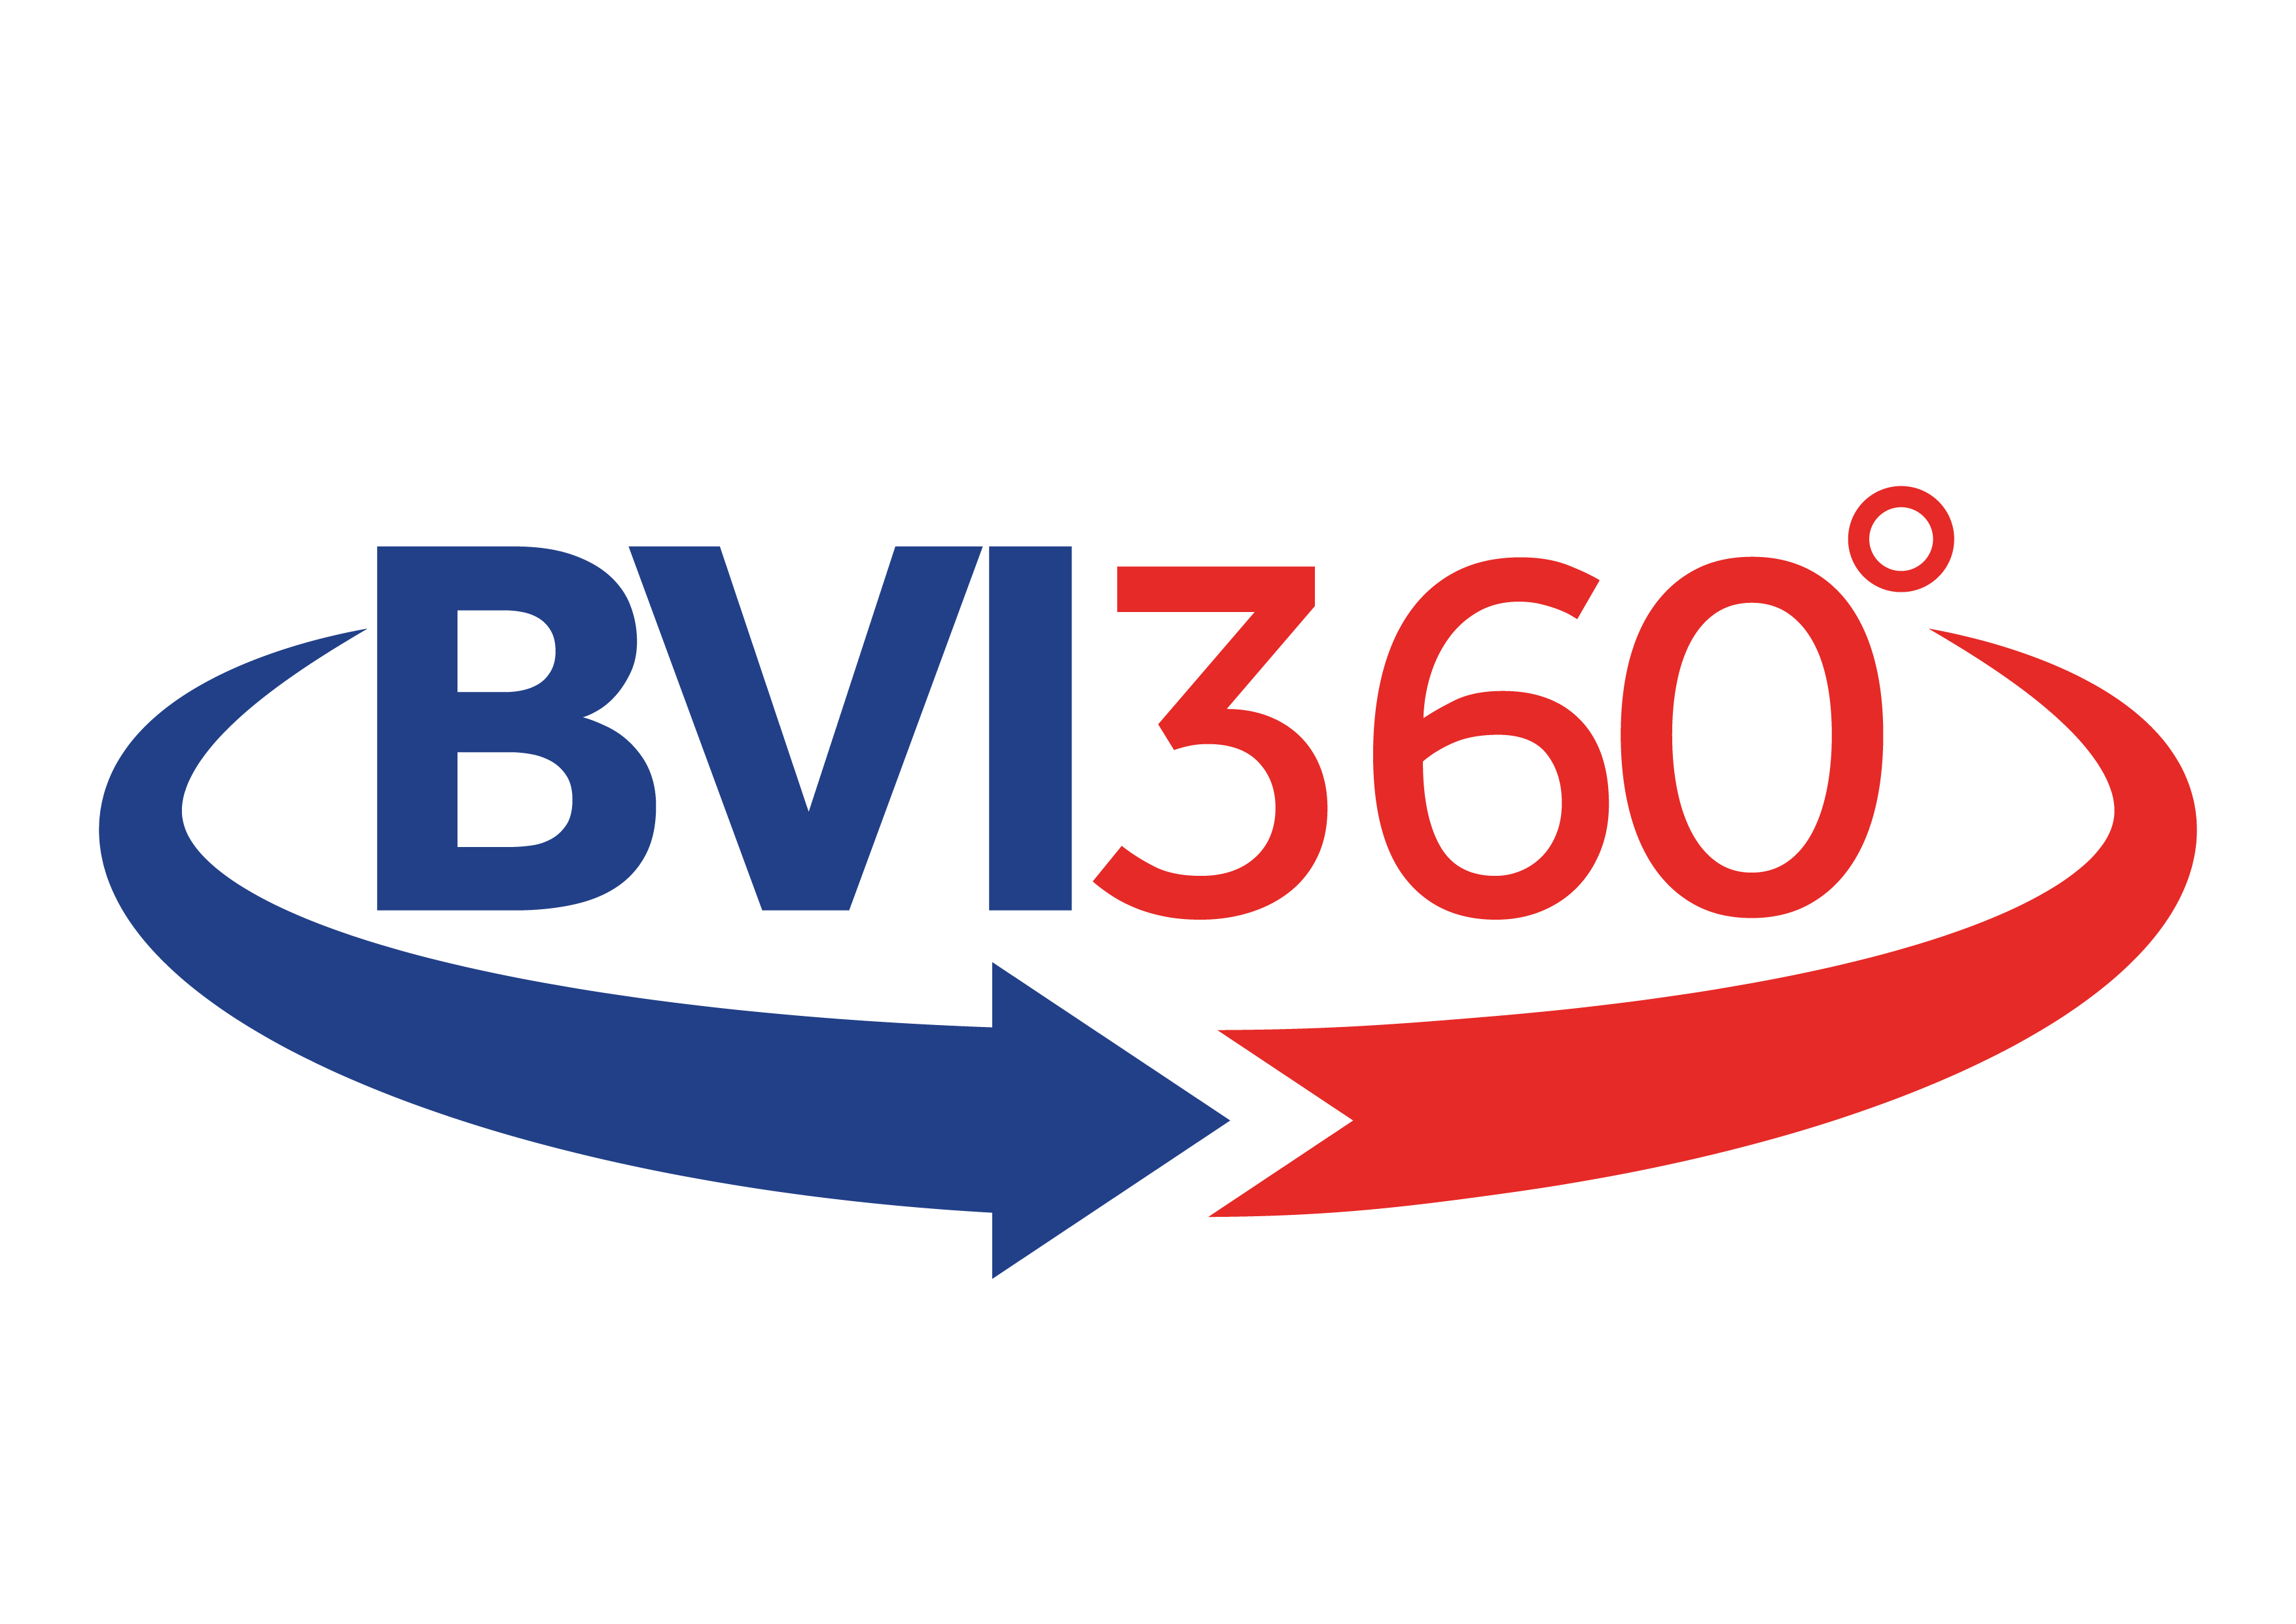 THIS WEEK BVI360 FEATURES HOW FINANCIAL SERVICES MANAGED DURING COVID-19